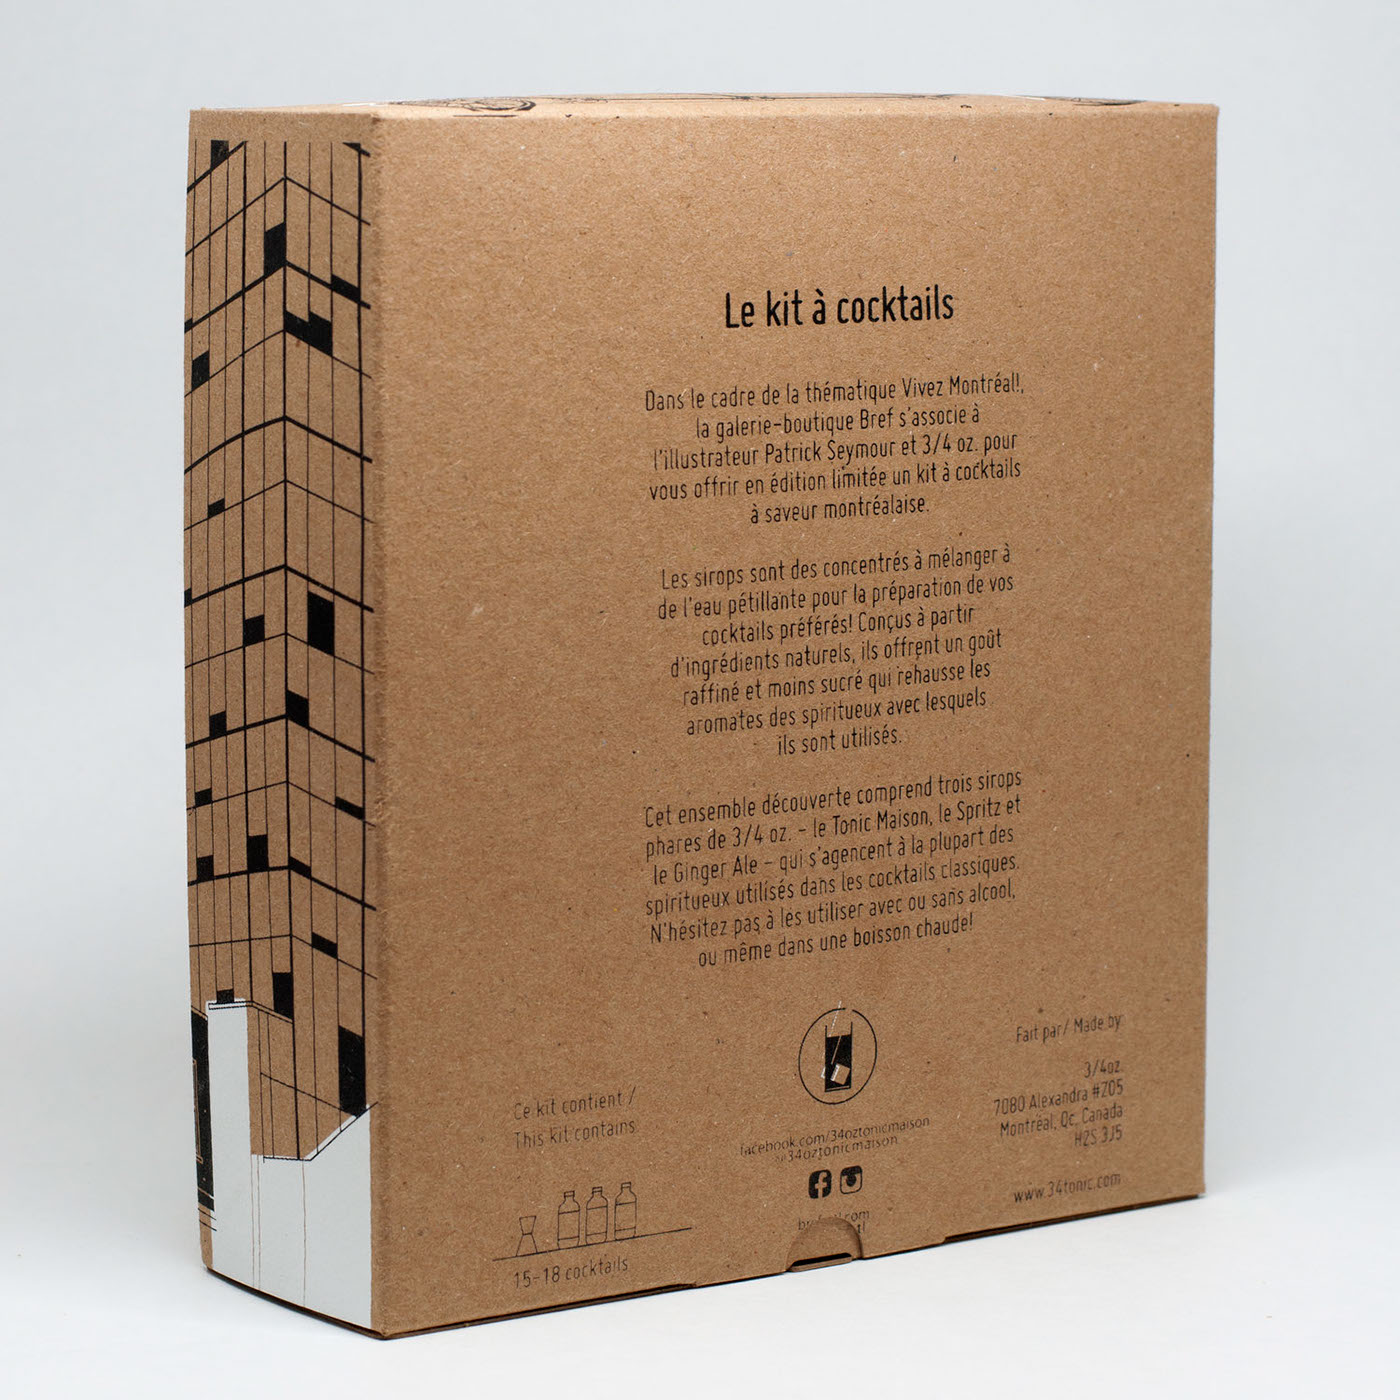 Packaging product Montreal design graphic concept tonic gin cocktail kit